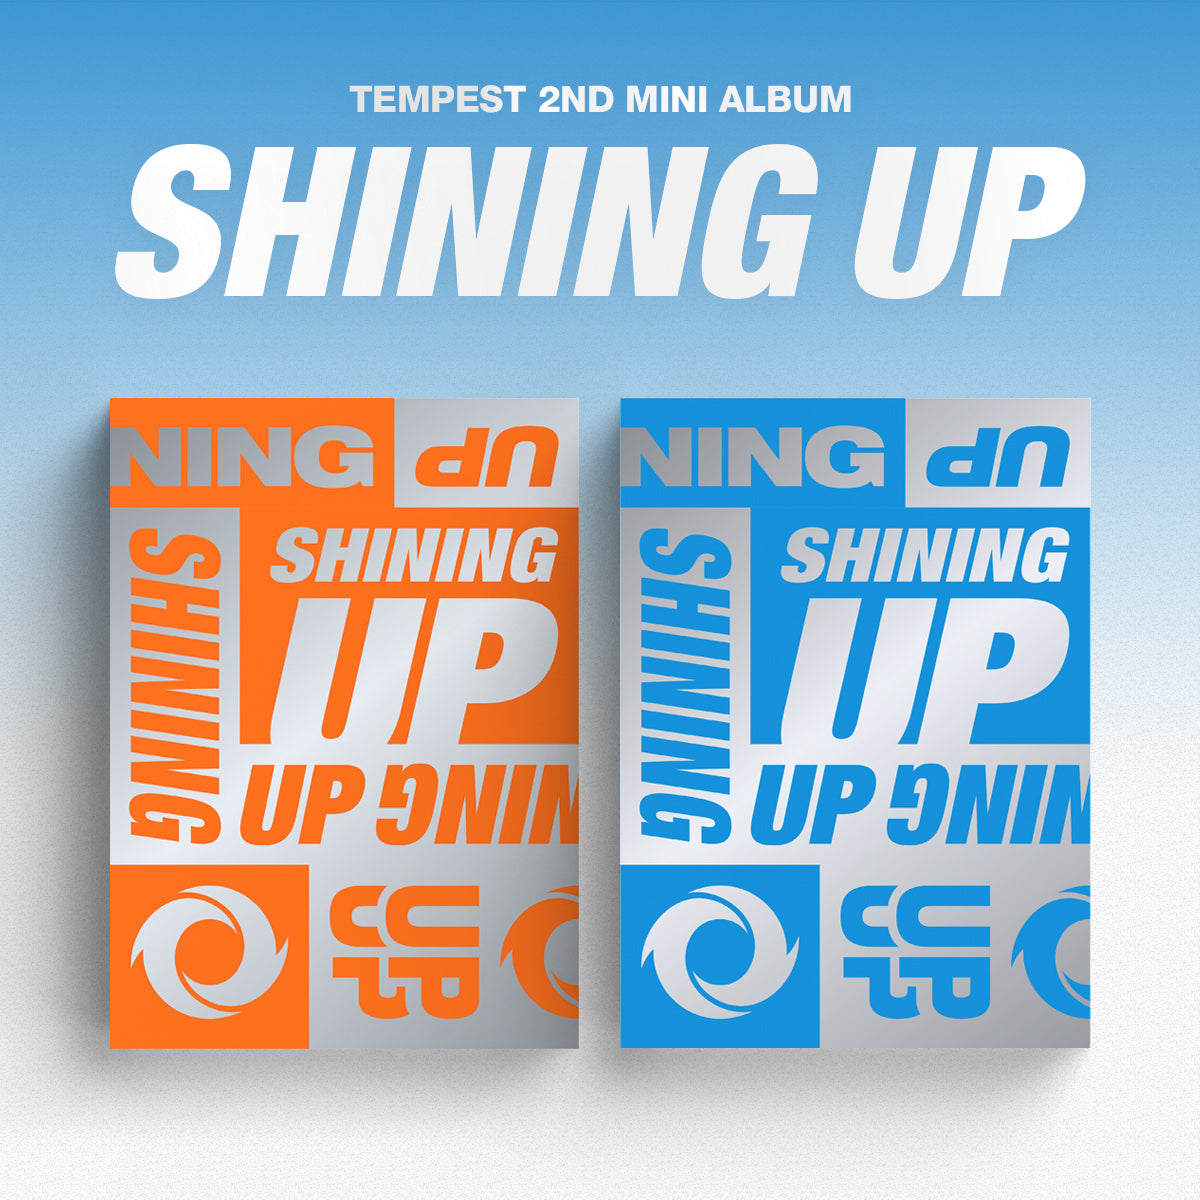 TEMPEST 2ND MINI ALBUM 'SHINING UP' COVER